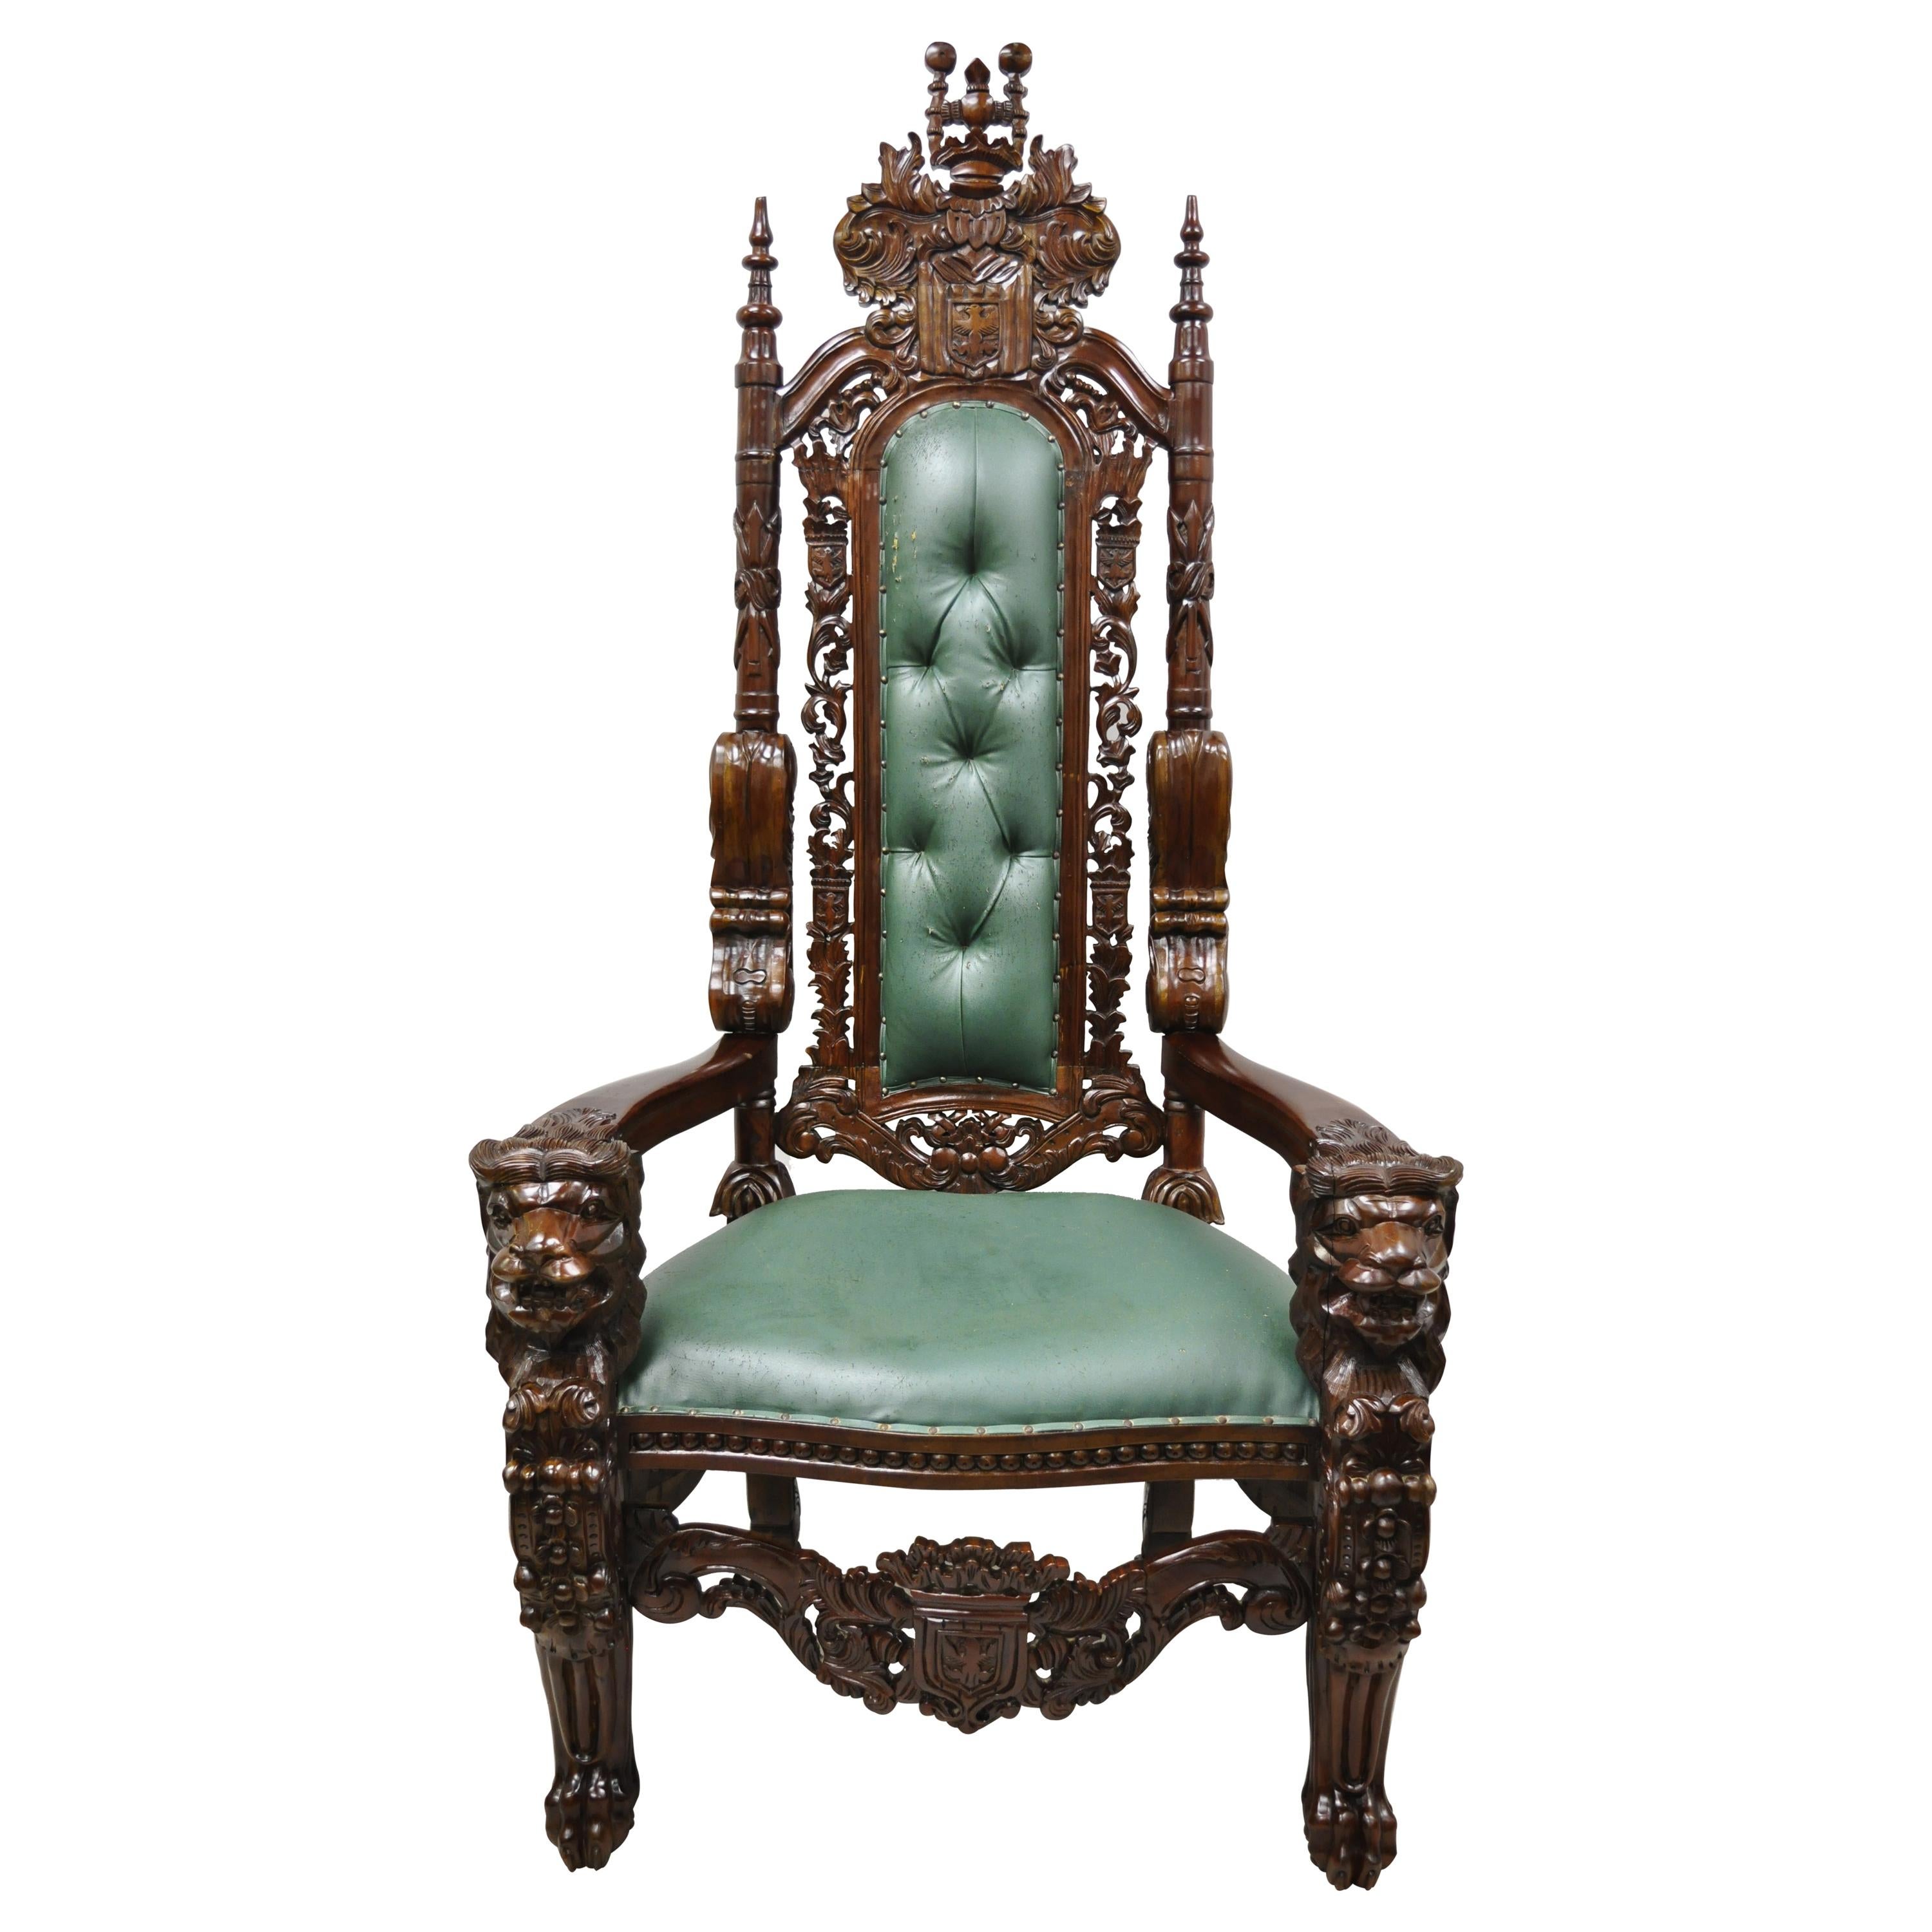 Throne Chairs (King & Queen )